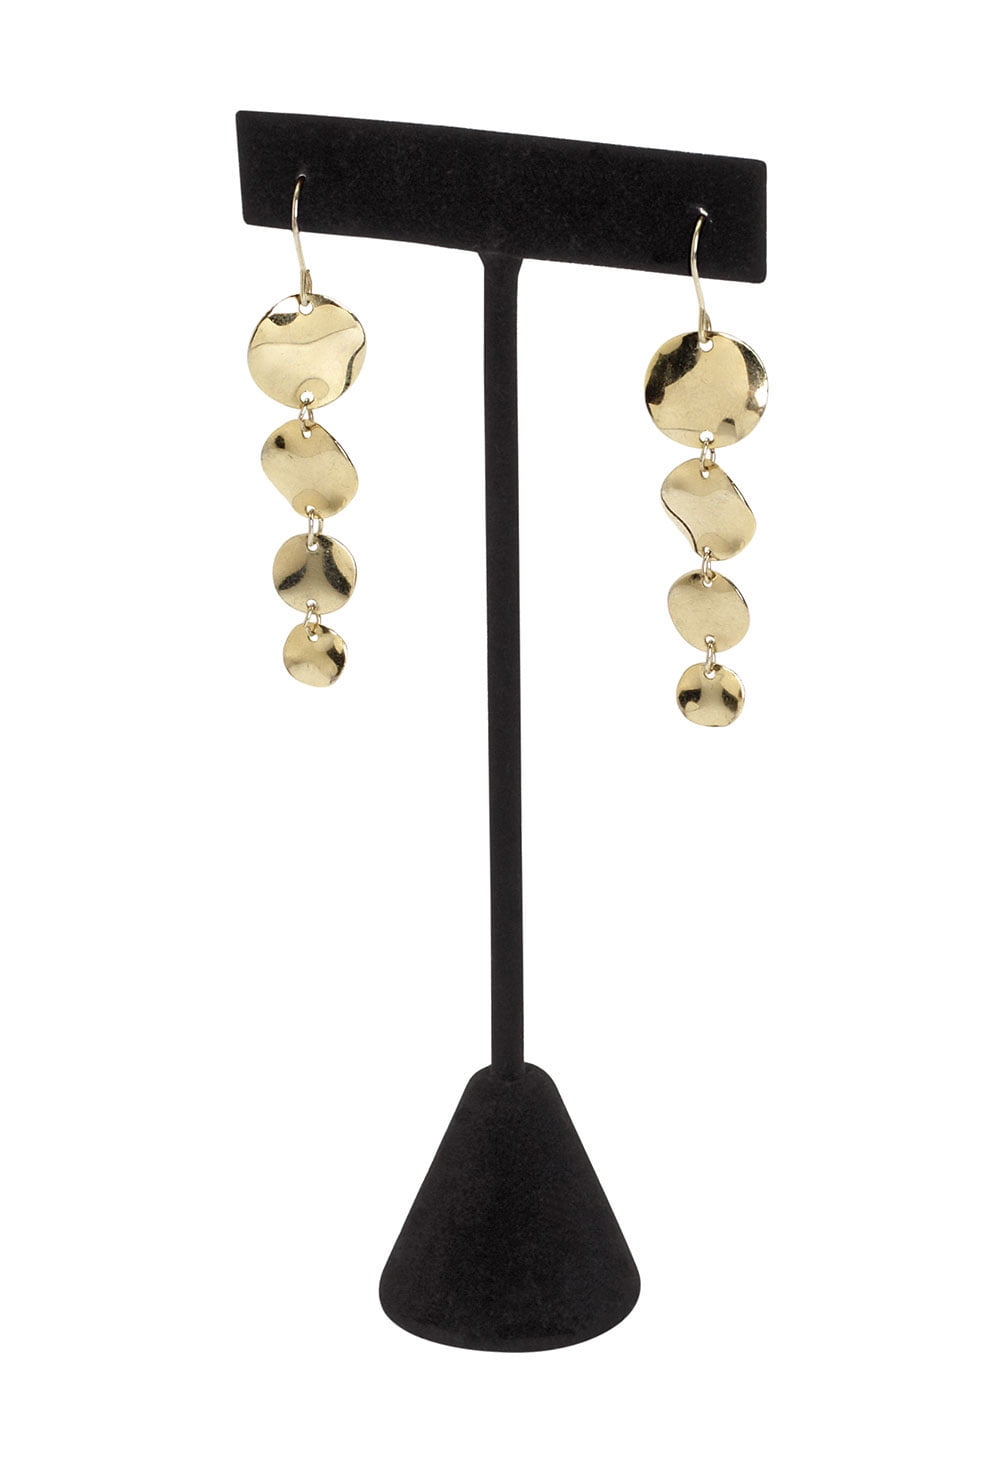 Black Velvet One Pair Earring Jewelry Display Holder Small T-Bar Stand 4 3/4" H 